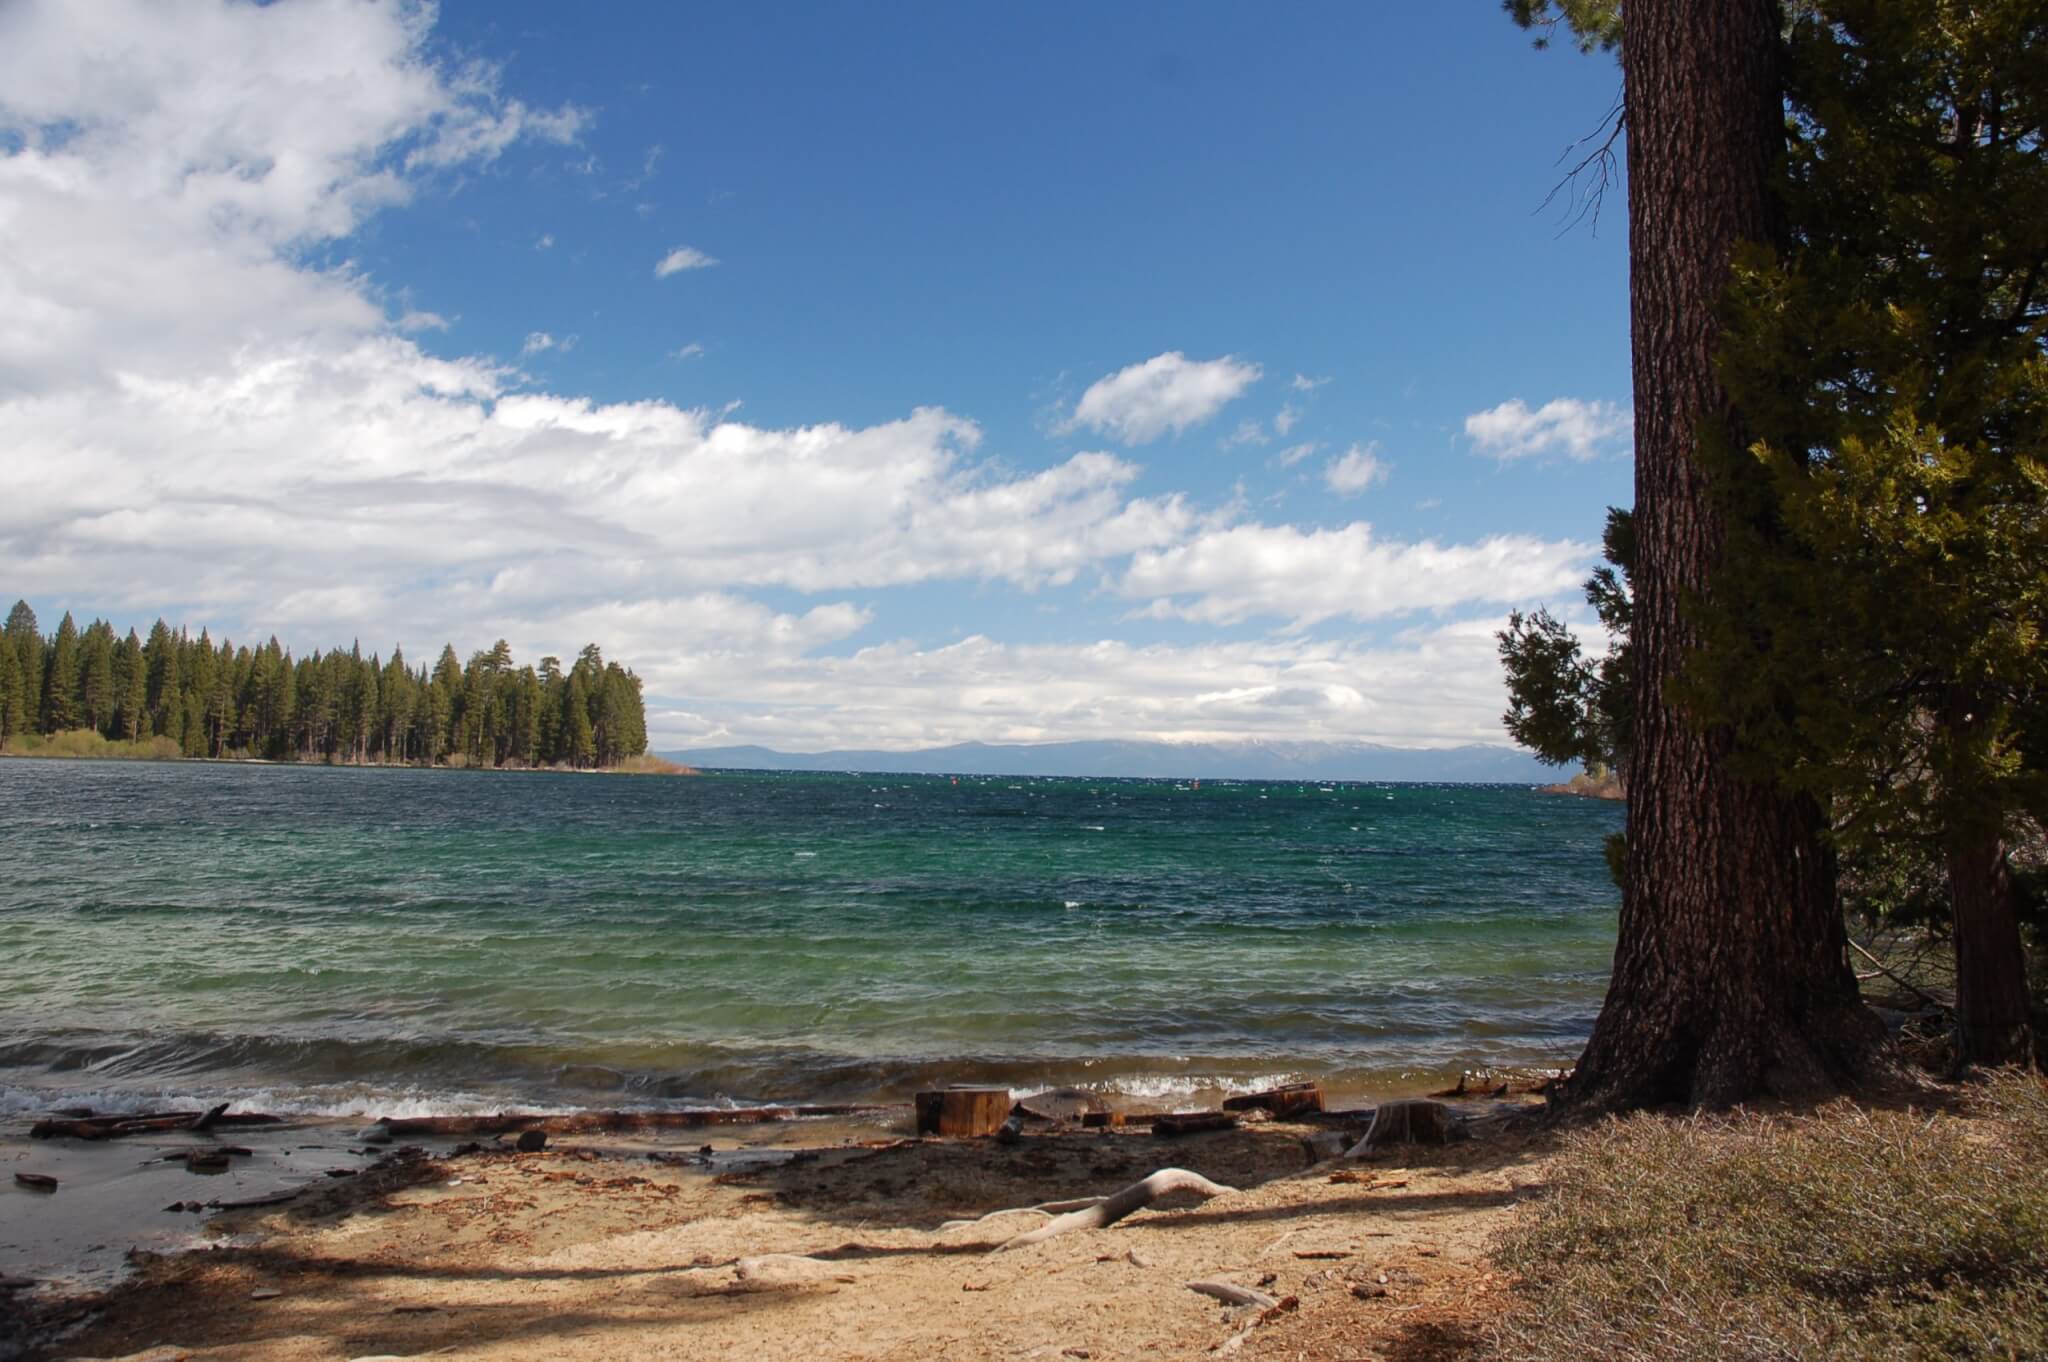 10 Best Lake Tahoe Campgrounds - Emerald Bay